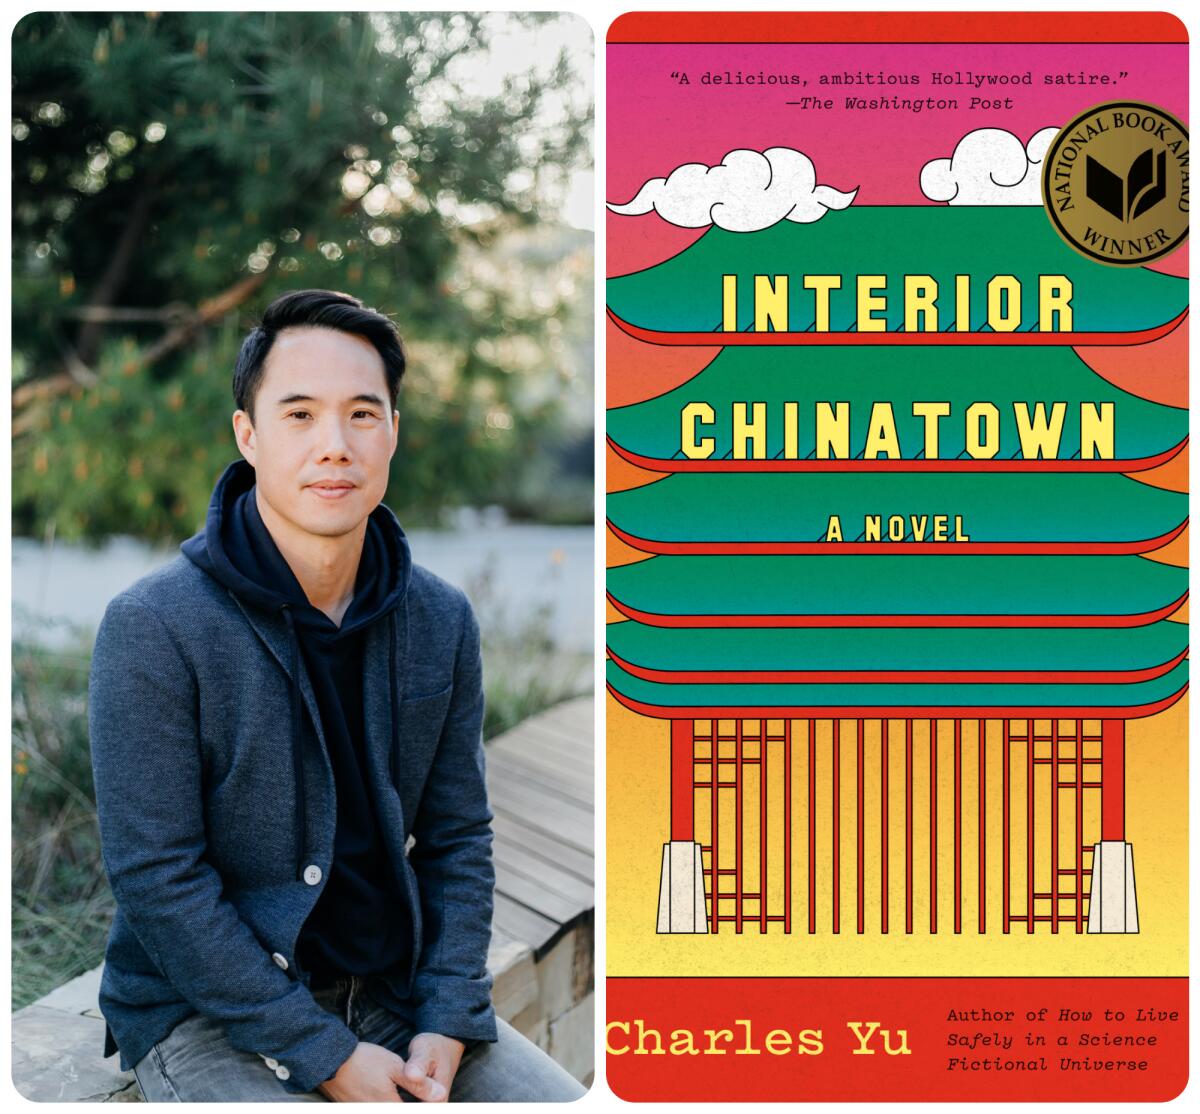 Charles Yu is the author of "Interior Chinatown."